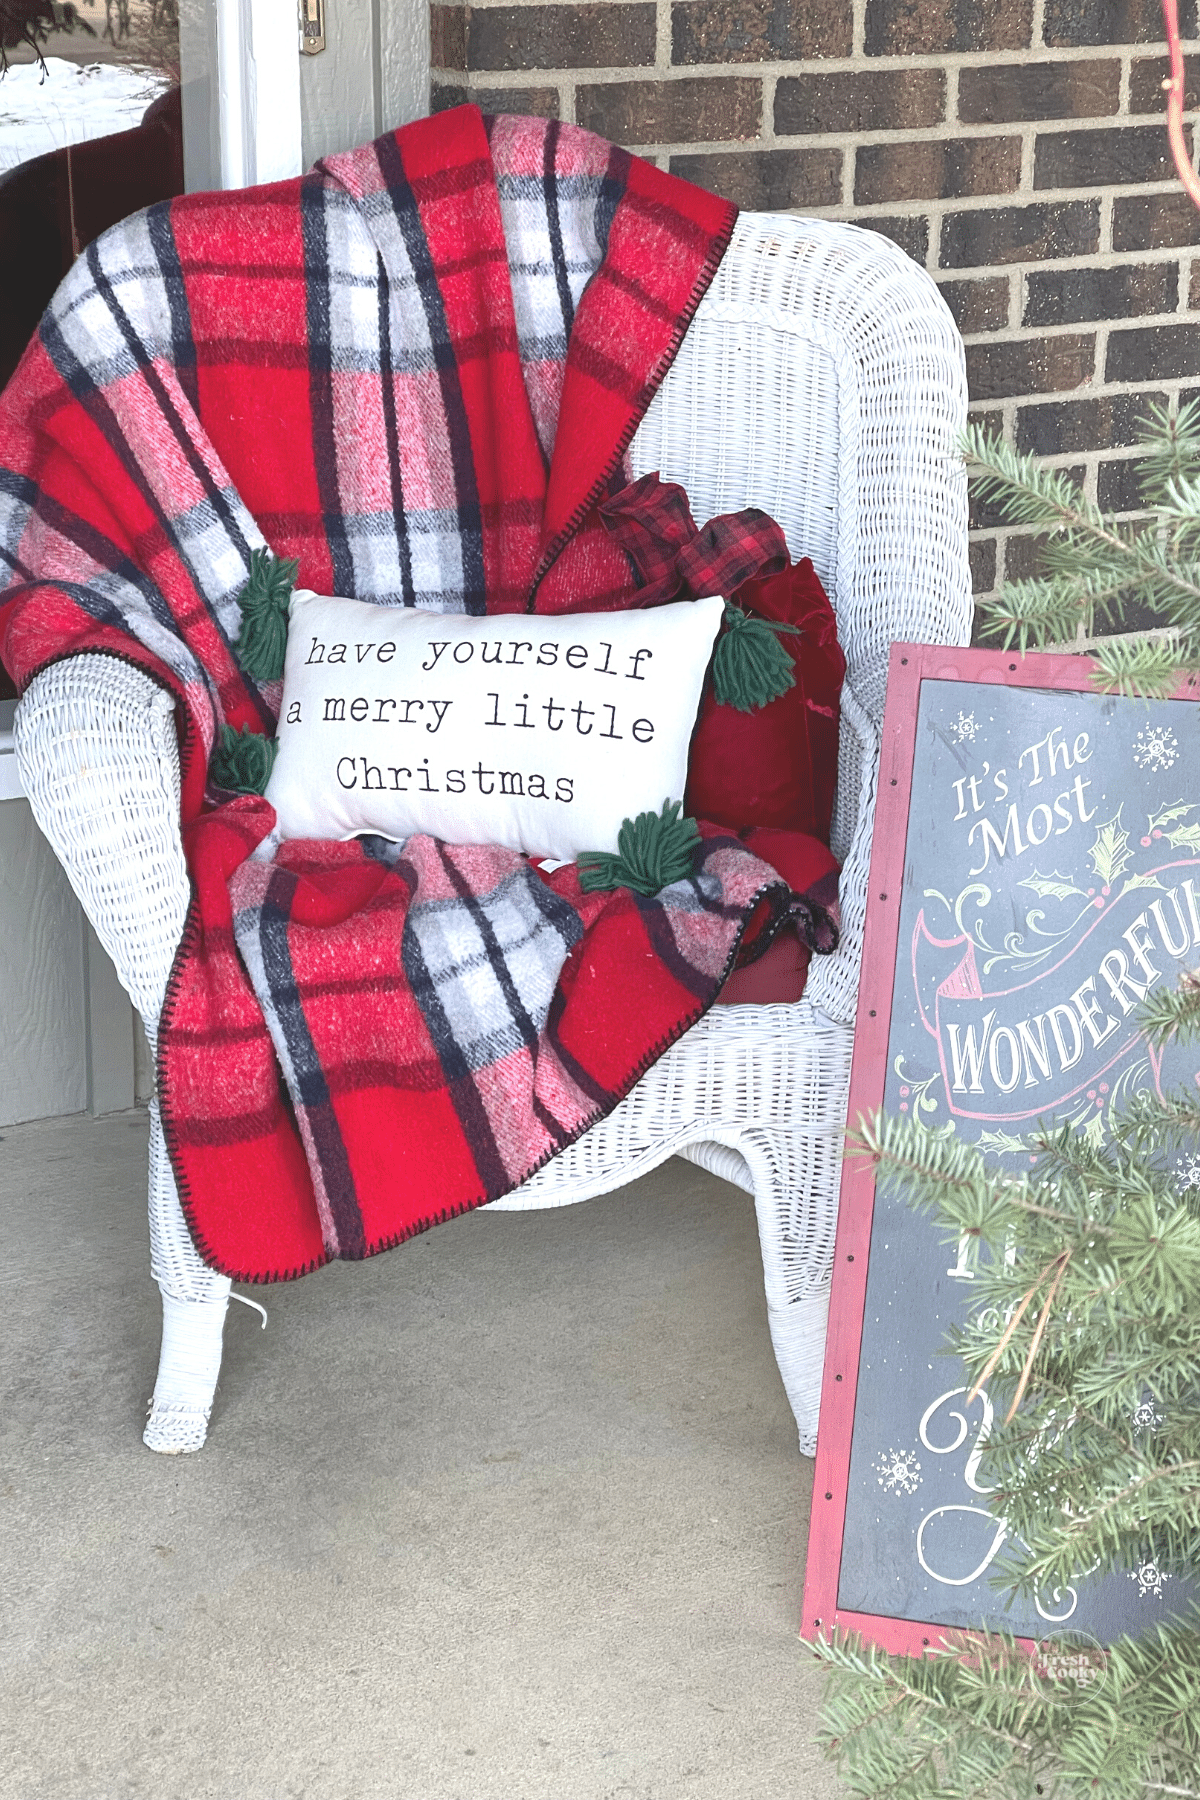 Chair decorated for Christmas and sign welcoming all who gather here.